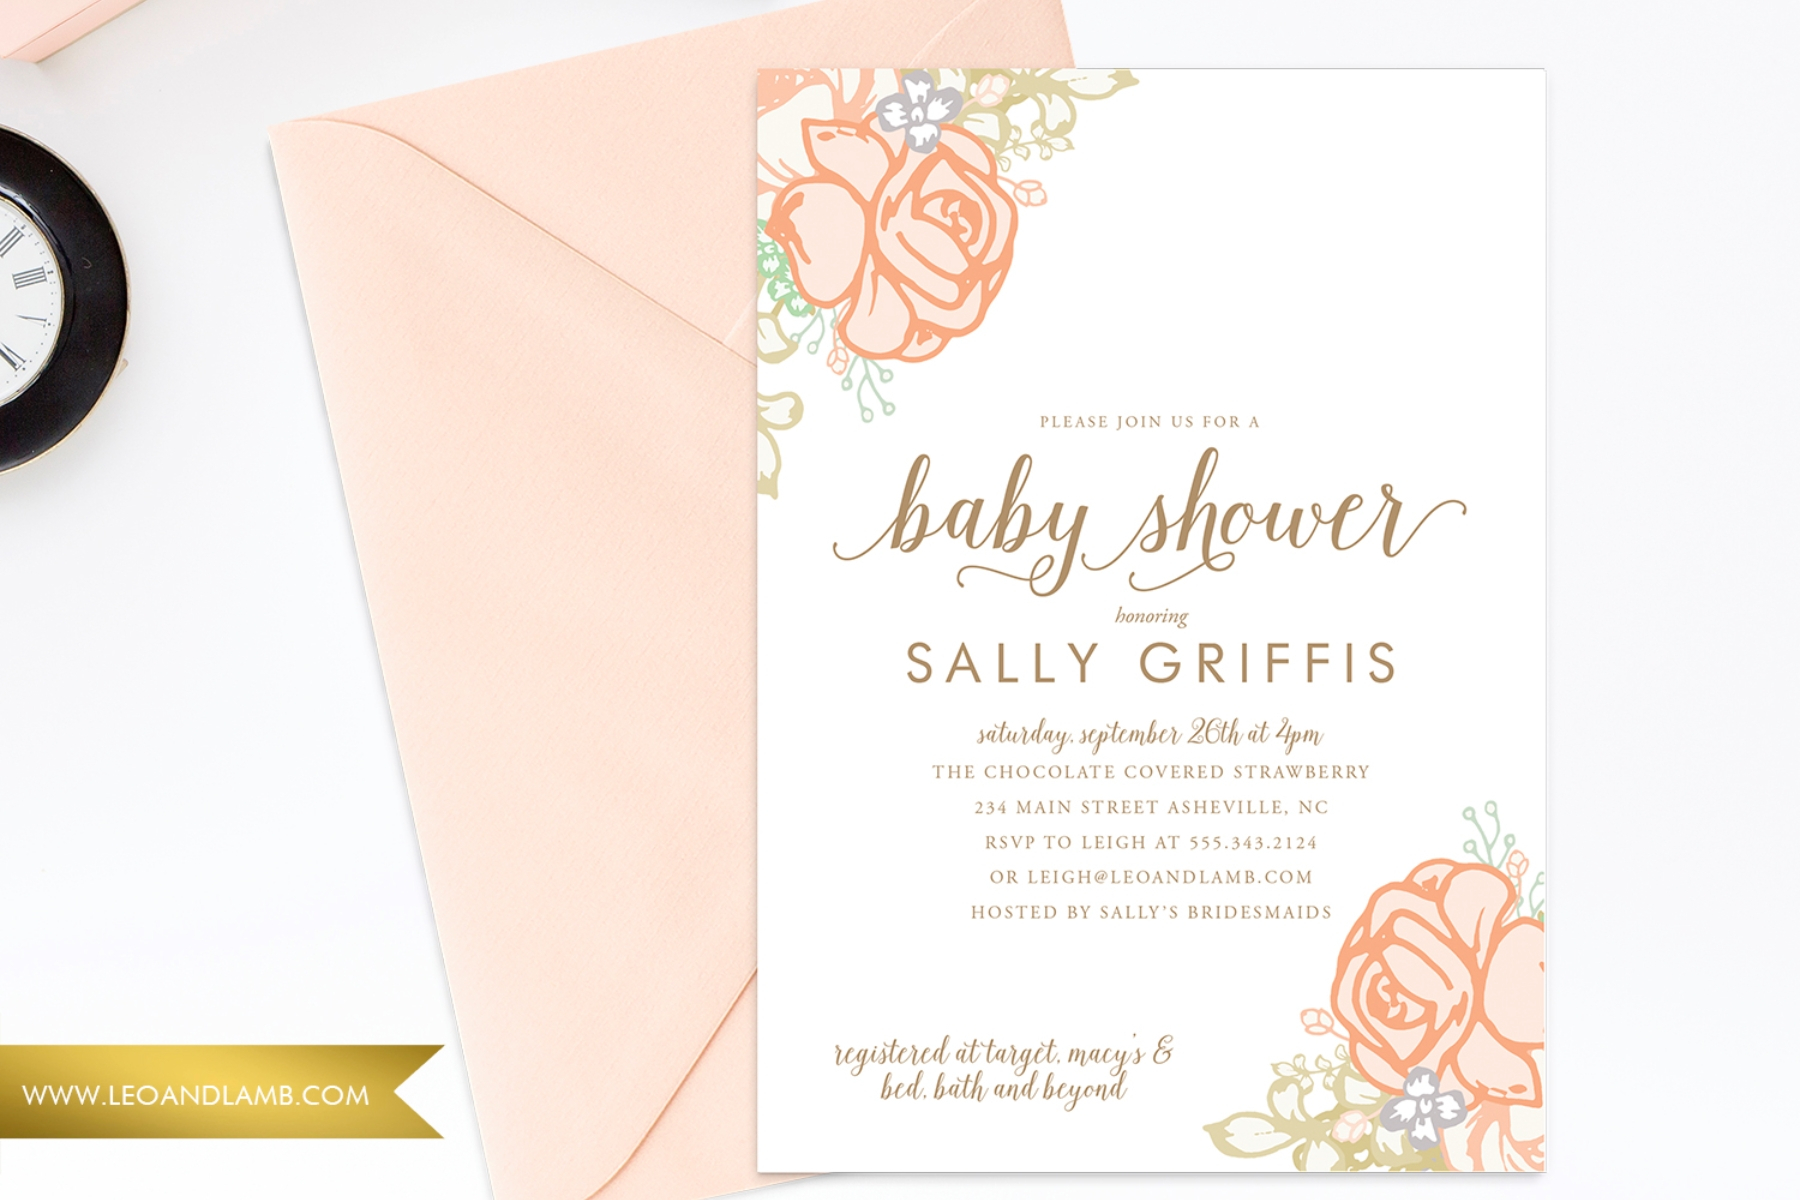 Bed Bath And Beyond Wedding Invitations Bed Bath And Beyond Wedding Invitations Bed Bath And Beyond Wedding